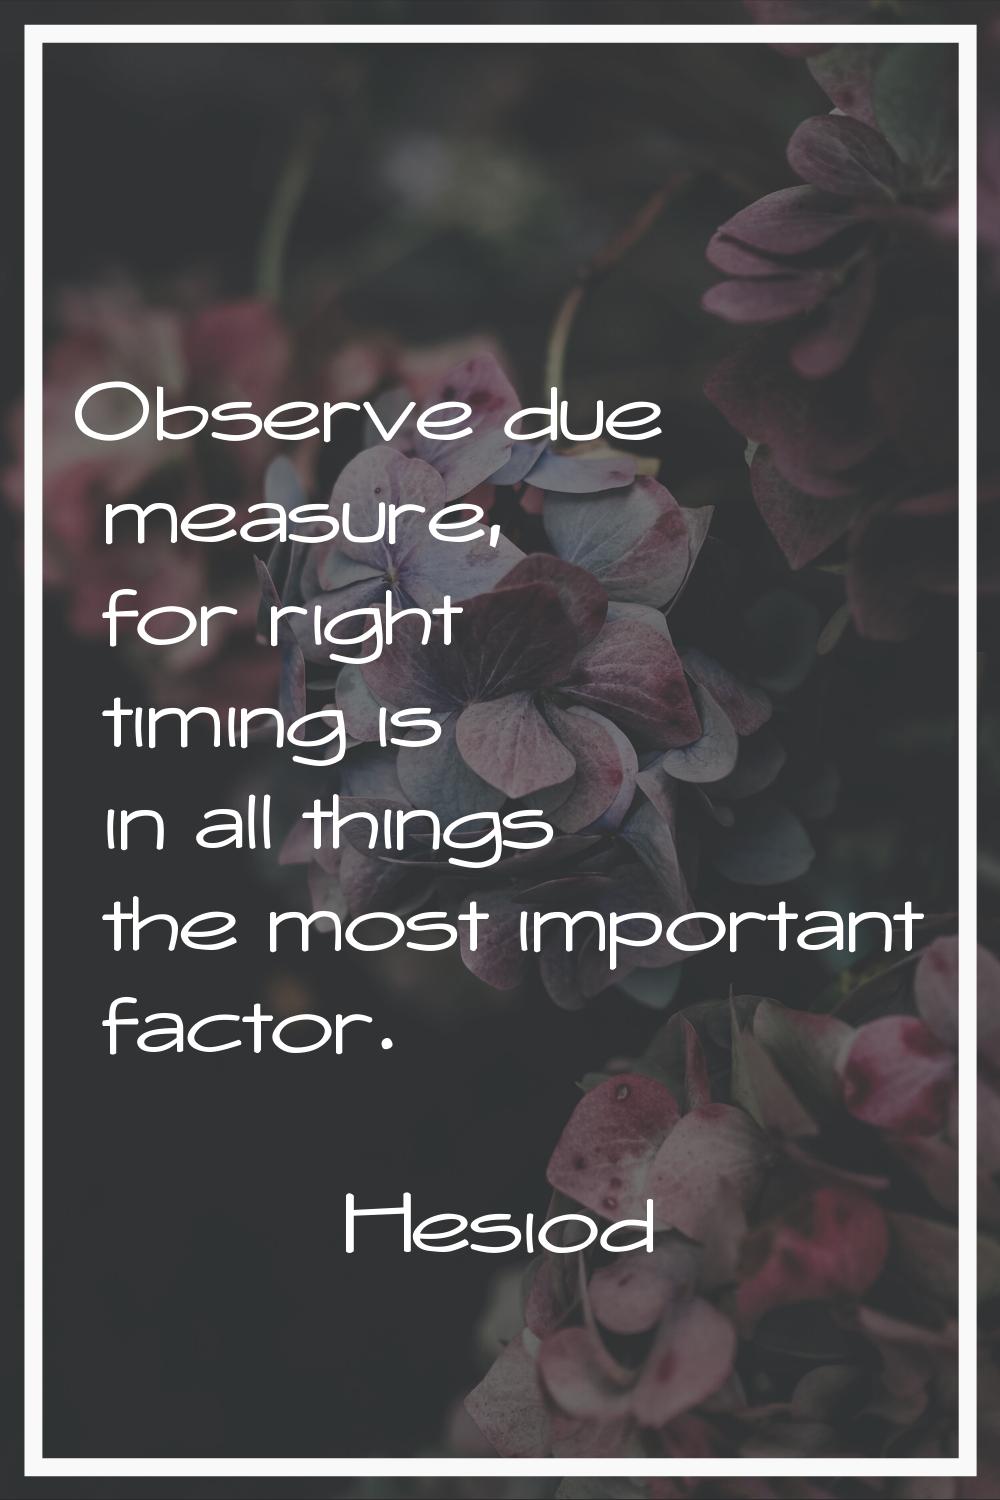 Observe due measure, for right timing is in all things the most important factor.